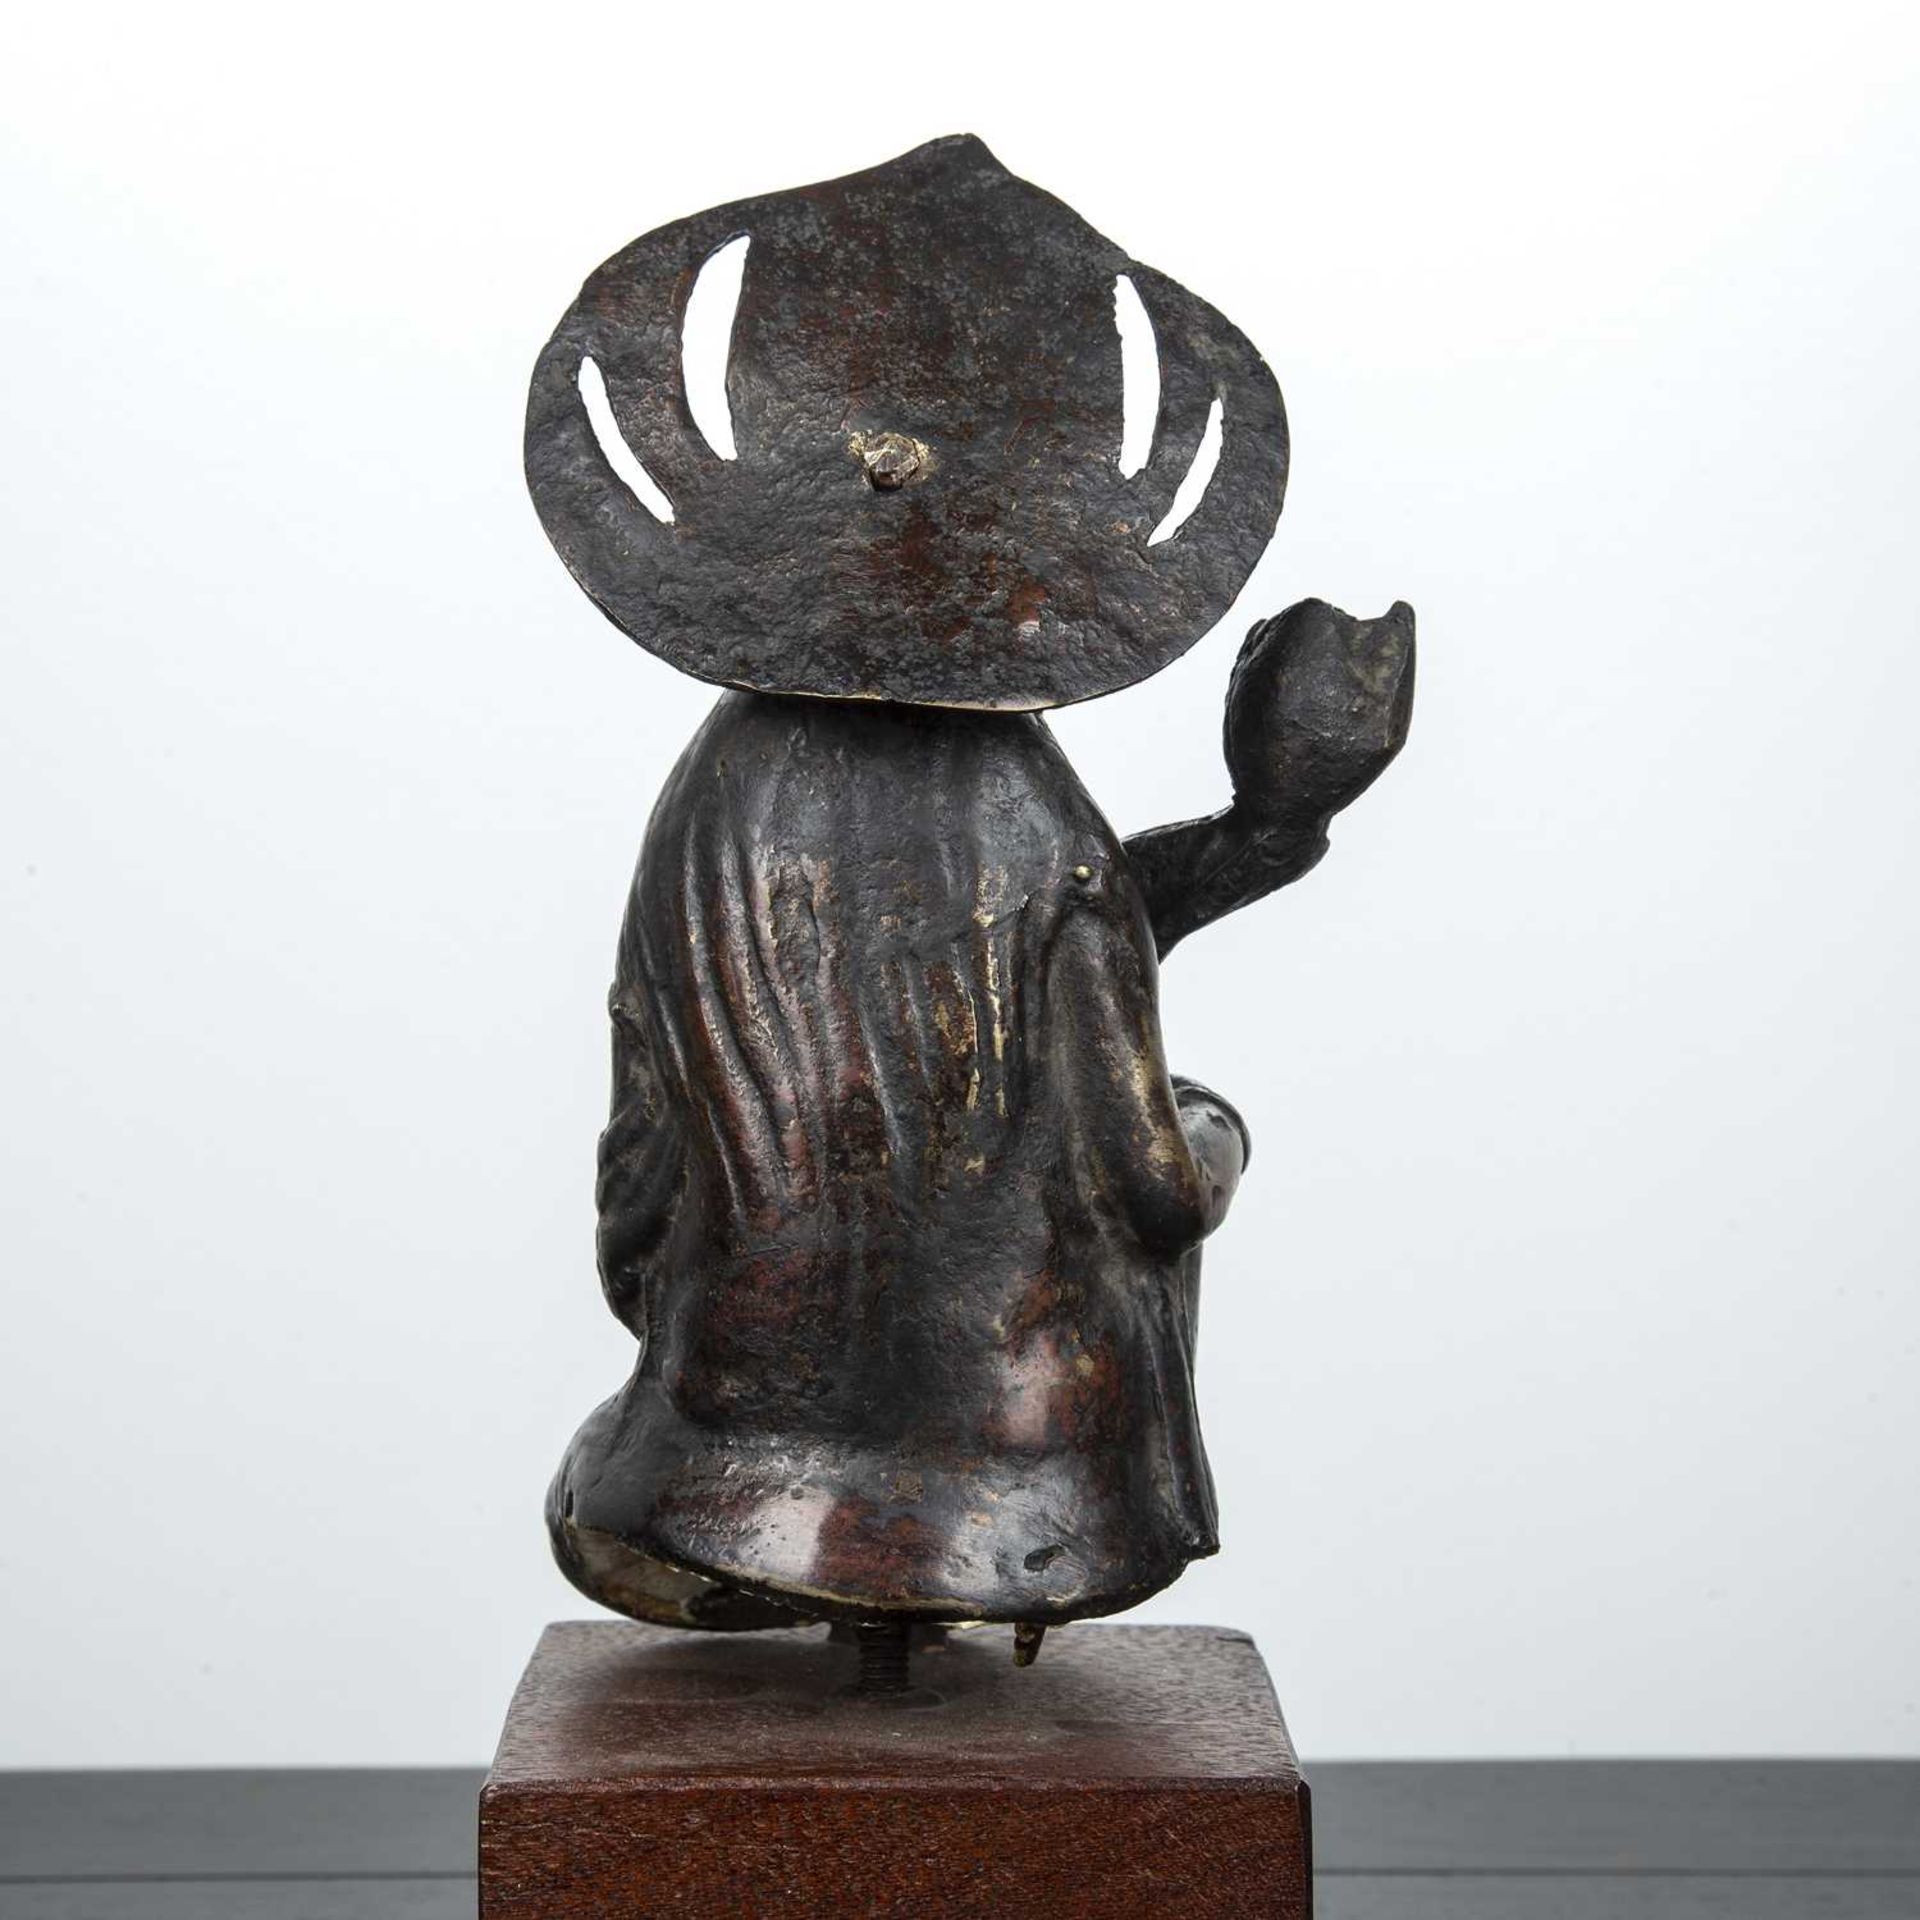 Part gilded bronze Bodhisattva South East Asian, 17th Century the kneeling figure holding a lotus - Image 2 of 3